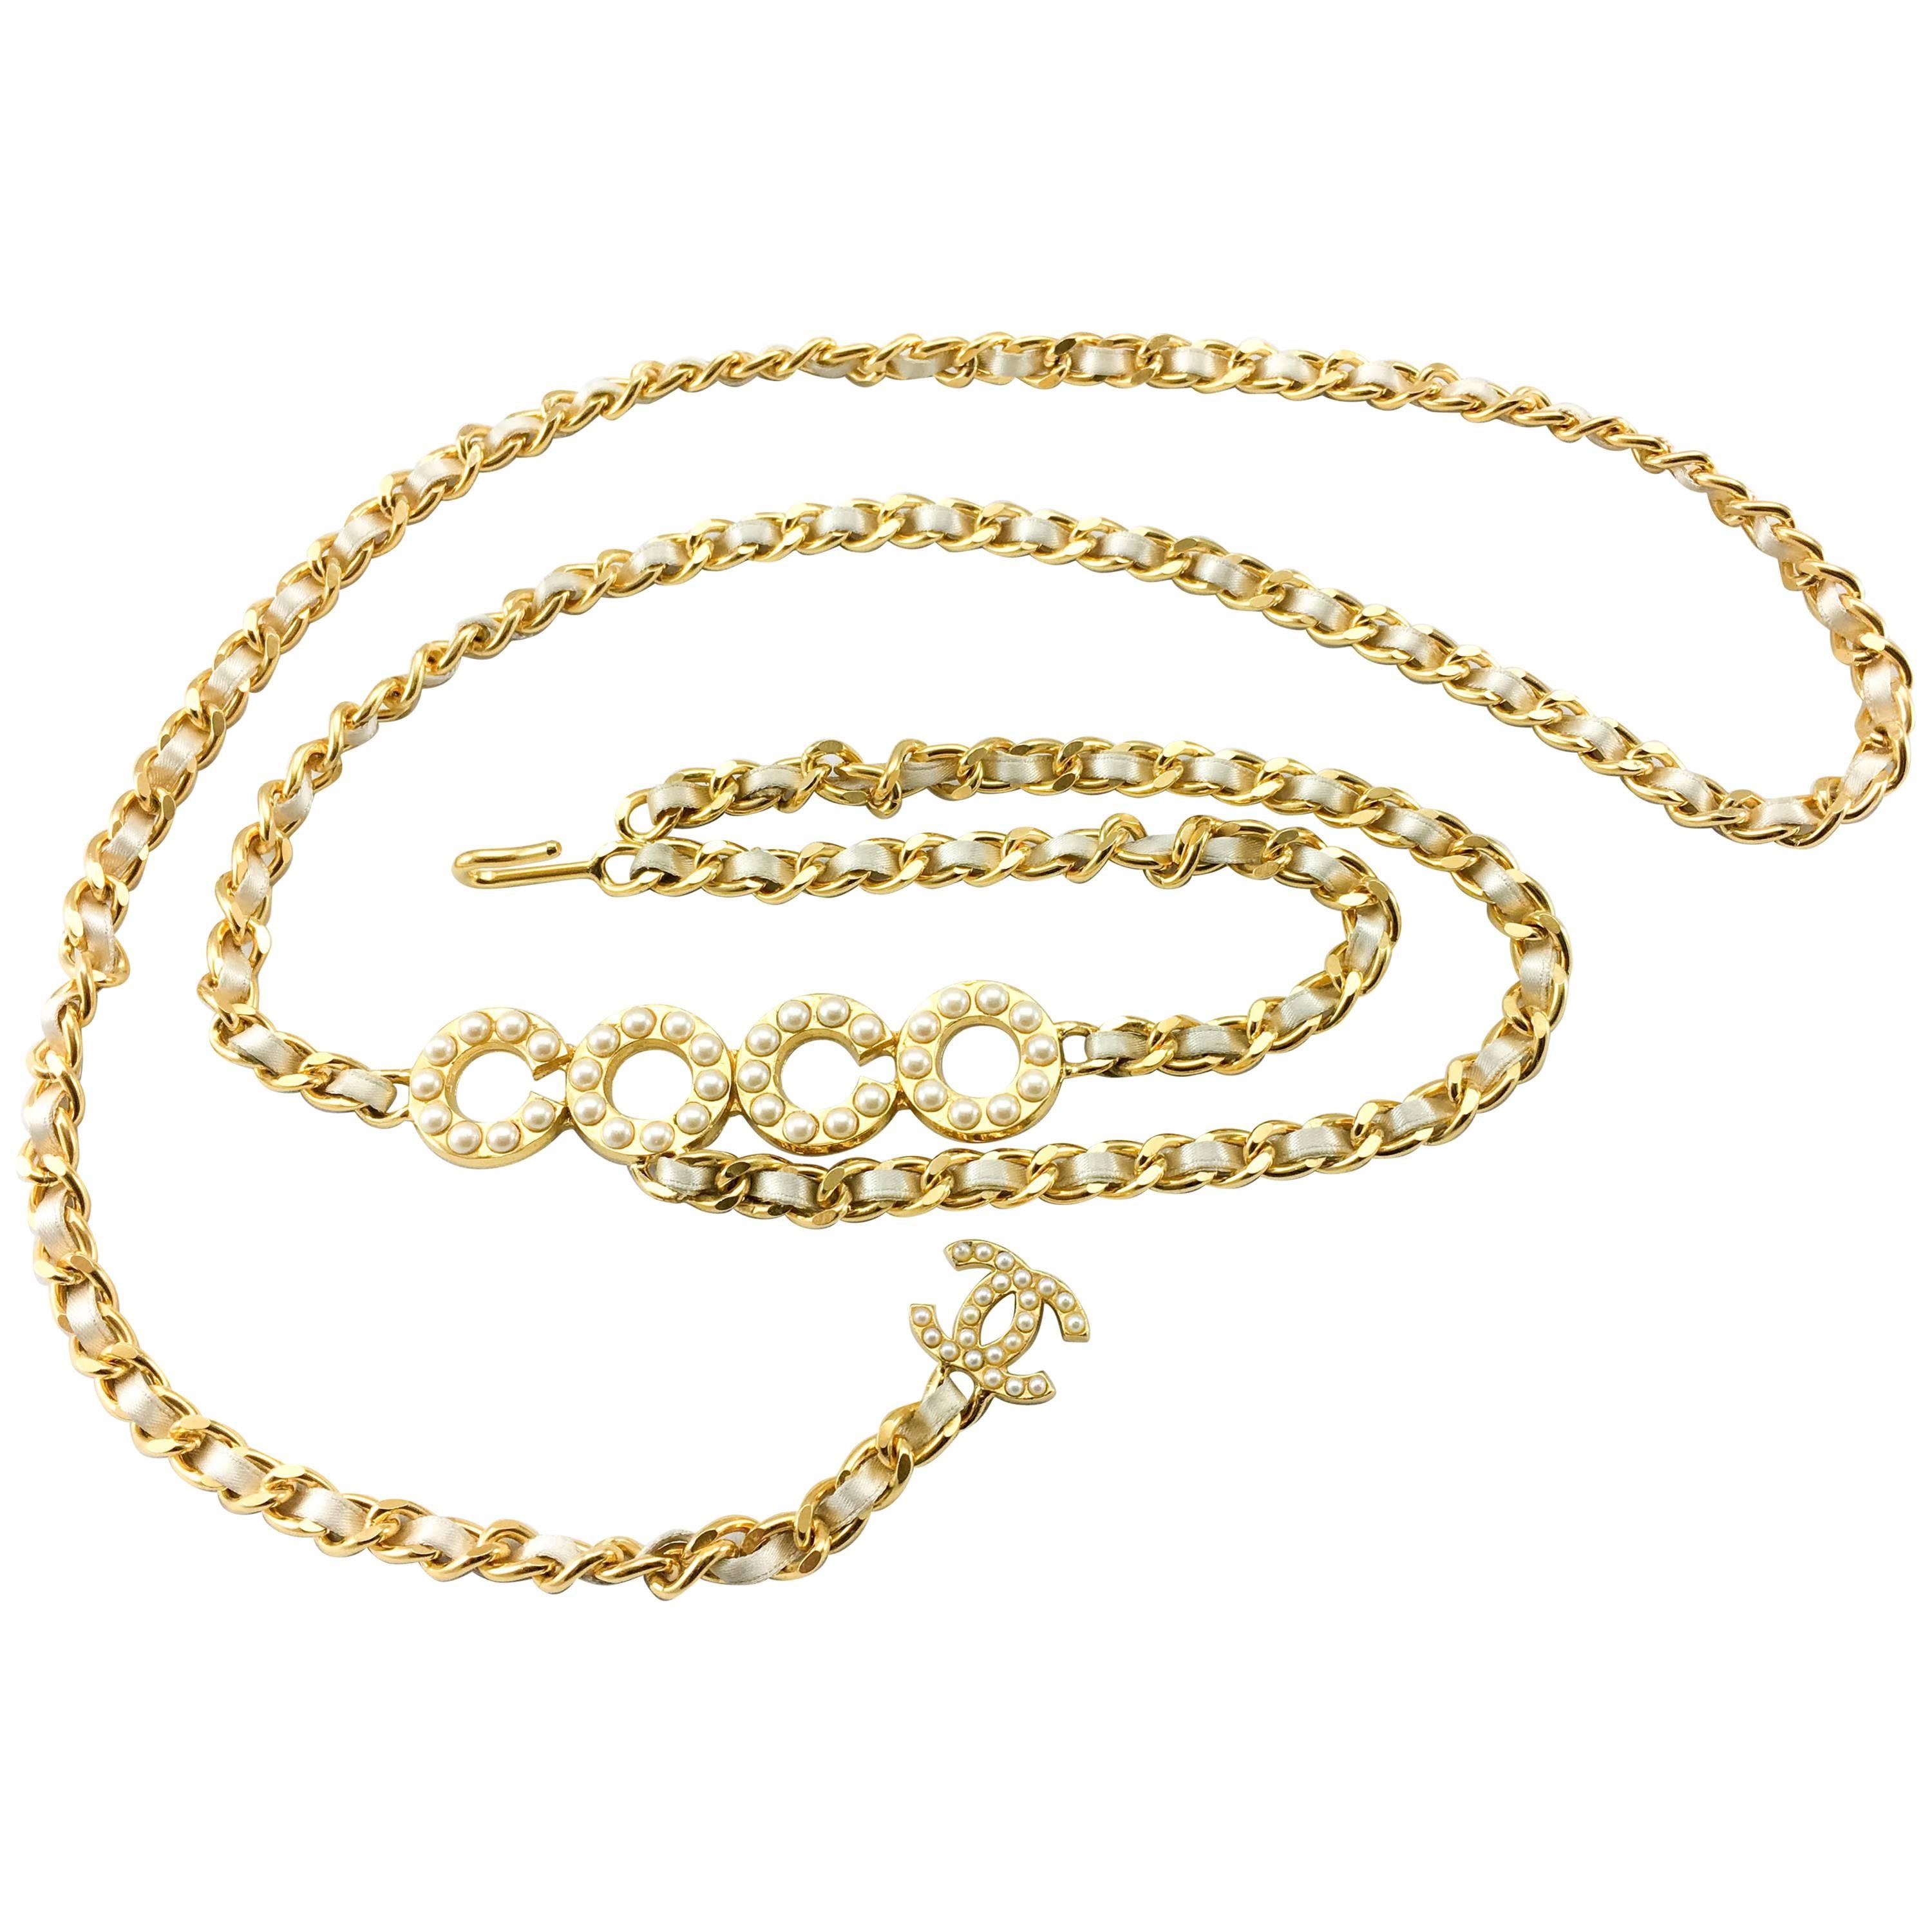 Chanel Gold-Tone Woven Chain and Faux Pearl 'Coco' Belt / Necklace - 2001